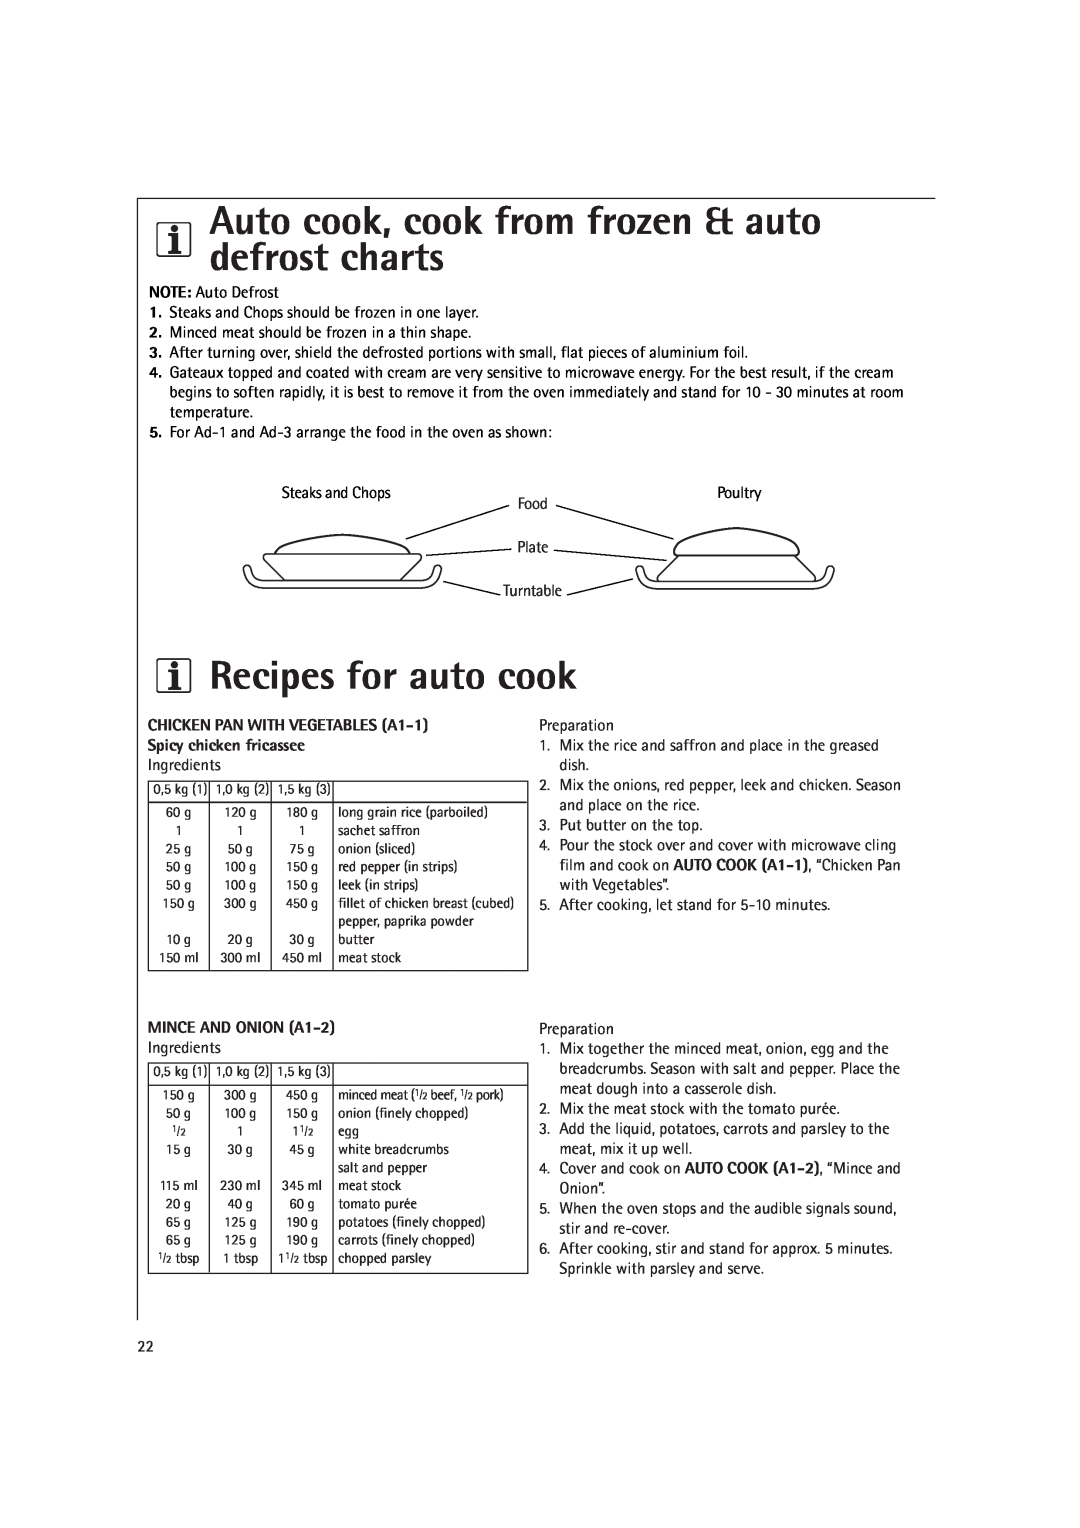 AEG MC2661E manual Recipes for auto cook, Auto cook, cook from frozen & auto defrost charts, MINCE AND ONION A1-2 